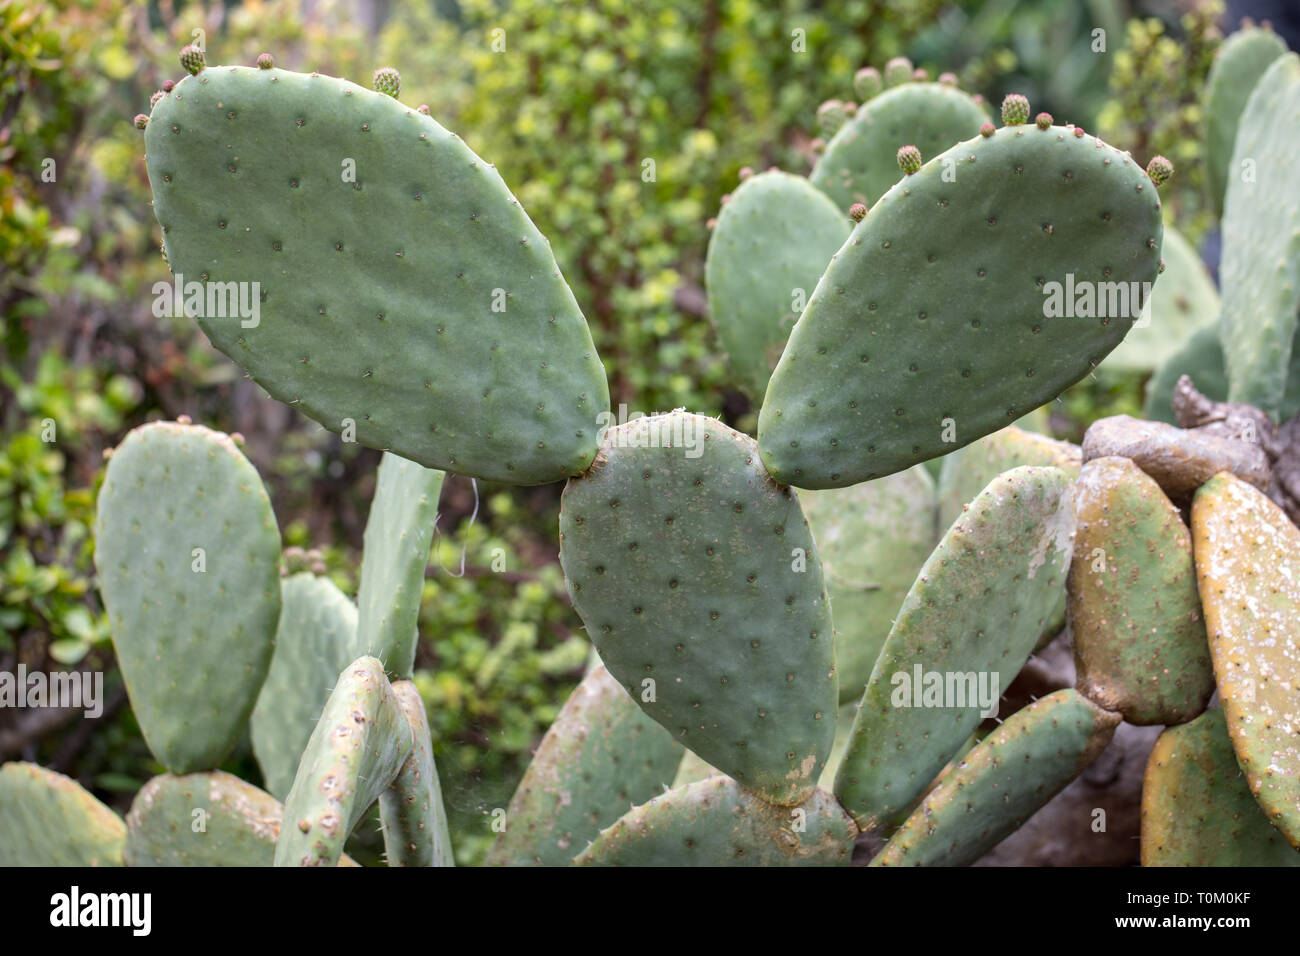 Opuntia vulgaris is a species of cactus that has long been a domesticated crop plant important in agricultural economies throughout arid and semiarid  Stock Photo